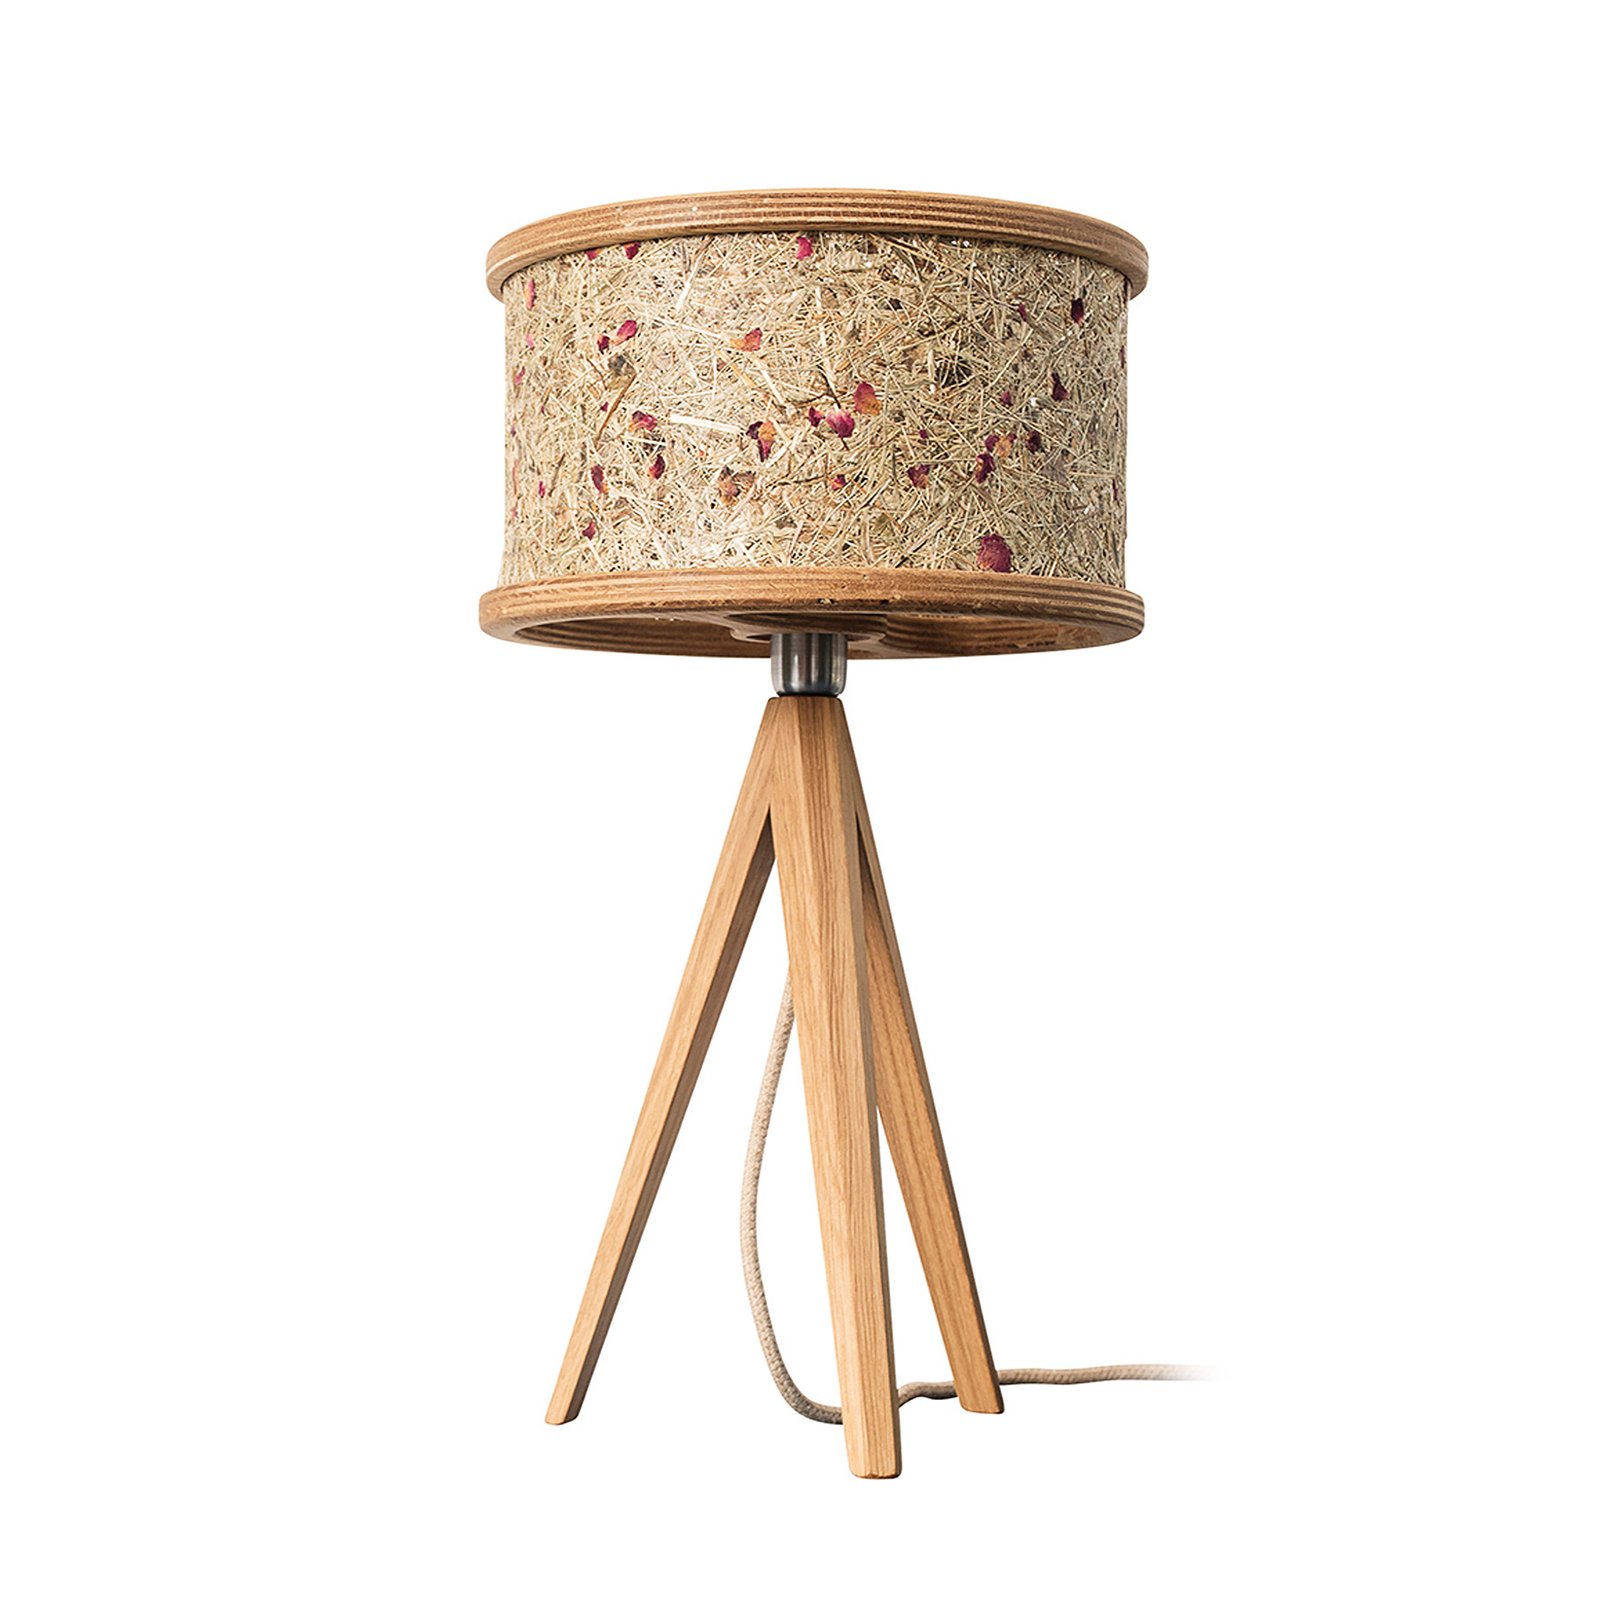 ALMUT 2610 table lamp, hay with red rose blossoms